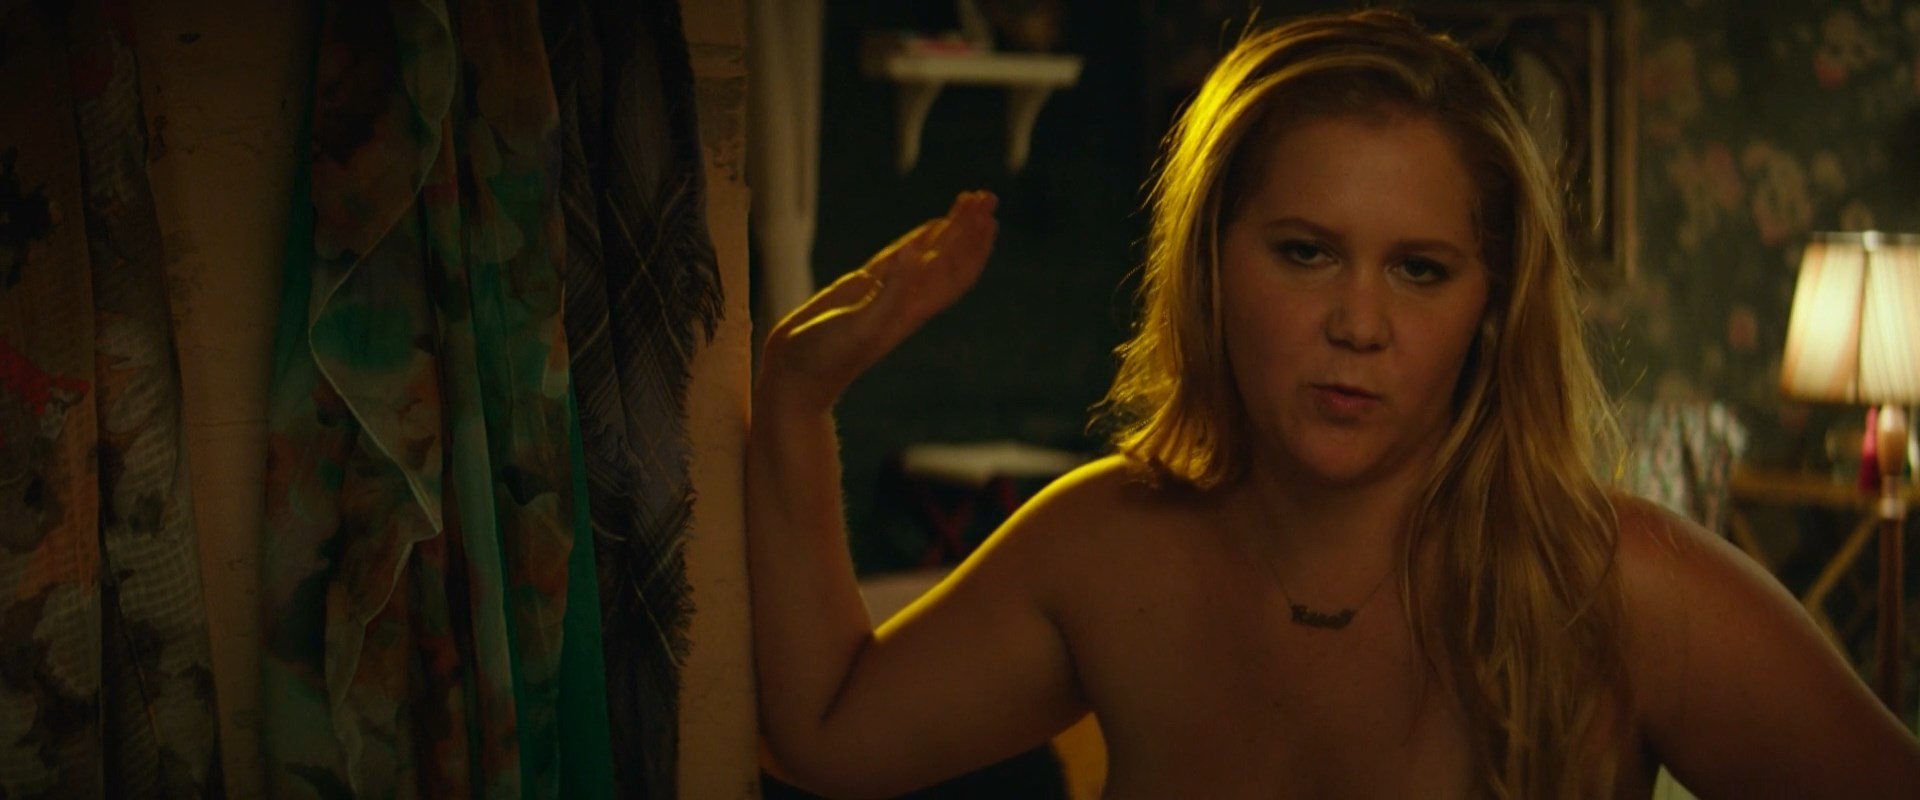 Amy Schumer Nude - 3 Pictures: Rating 6.77/10